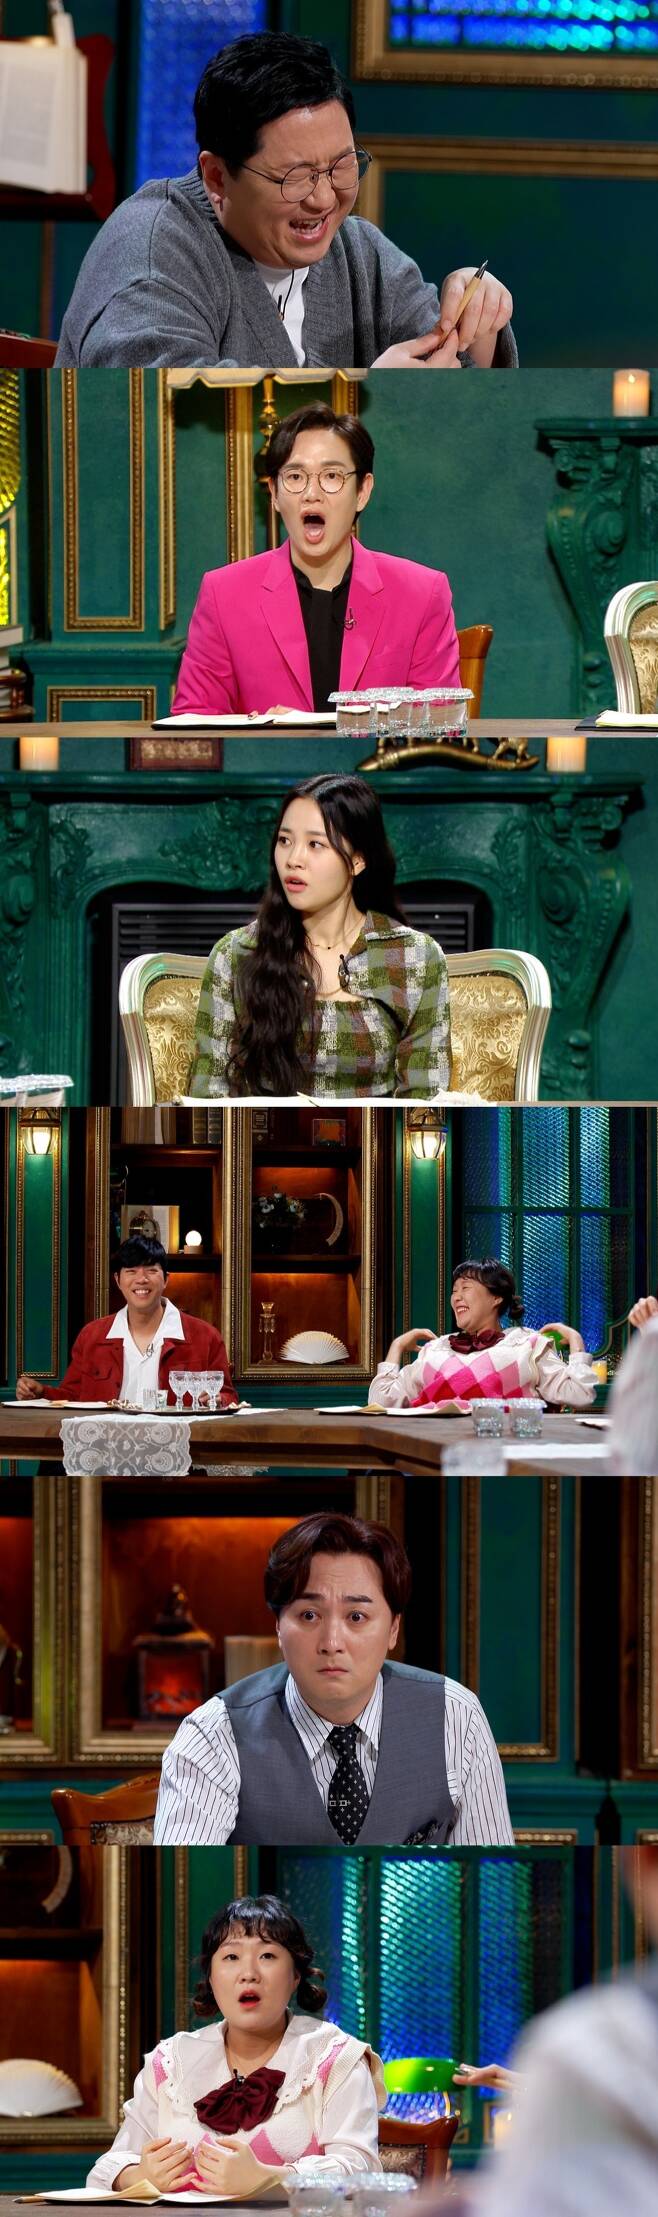 Seoul) = The story of a gold spoon landlord who has spent his entire life hiding in a mansion is revealed.In the 8th MBC surprise secret room broadcasted on the afternoon of the 30th, Weekly Jihan, who likes mysterious stories, goes to MZ judge.Weekly Jihan showed various expressions in each situation, such as nervousness in the scary story and smile in the funny story, and even if he looked at the expression of Jihan, he could see how exciting the story of the day was.In addition, Seo Tae-hoon and Lee Soo-ji, who gave a pleasant smile on the last 7 broadcasts, will be together in this 8th.The second round of the show will feature teams competing on the theme of Amazing Discovery. Jang Sung-kyus team goes to England in the 1700s.He needed a place to sleep with his little daughter.Then one day, when he found the advertisement for The Housemaid on the wall, he started working immediately in the mansion.The butler of the mansion asks him to have one condition, which is that he should never meet the owner of this mansion.Curiously, the owners identity was a mystery itself, so that no one else saw the landlords face.Then one day, The Housemaid ran into a late-night outing landlord, and nowhere in the mansion since Agnaldo Timóteo could find the Housemaid, but what happened to Agnaldo Timóteo night?In an exciting story development, Jeong Hyeong-don and Empire showed a mans story saying, What the hell is going on? And Jihan also shouted It is a big hit with a curious face and tried hard to guess about the identity of the man.Meanwhile, the amazing discovery of the Jeong Hyeong-don team begins in a city in Italy, where the war was in full swing in the 1940s.Allied forces, bombed by German forces, lost a lot of supplies and soldiers, but after 12 hours, abnormalities begin to appear in the soldiers bodies, their eyes swelling, even blindness.Suddenly, the soldiers who are not seeing are crying, and the scene becomes a mess.Since then, the residents of the city who have not been directly attacked by the enemy have begun to show signs of death.As the situation becomes serious, the Allies who have rushed into epidemiological investigations hear one unexpected story during the investigation process.Everyone in City had a very disgusting smell in common, what was the Identity of the smell that made them suffer?It is also surprising that the Identity of the smell that made the soldiers troubled led to the discovery of the century that saved everyone.Jihan was so focused on the story that he could listen to the story without knowing himself.The story of the landlord who hid his life in the mansion and the smell of the smell that led to the blindness of all during the war are revealed at 9 pm on the 30th at surprise secret room.